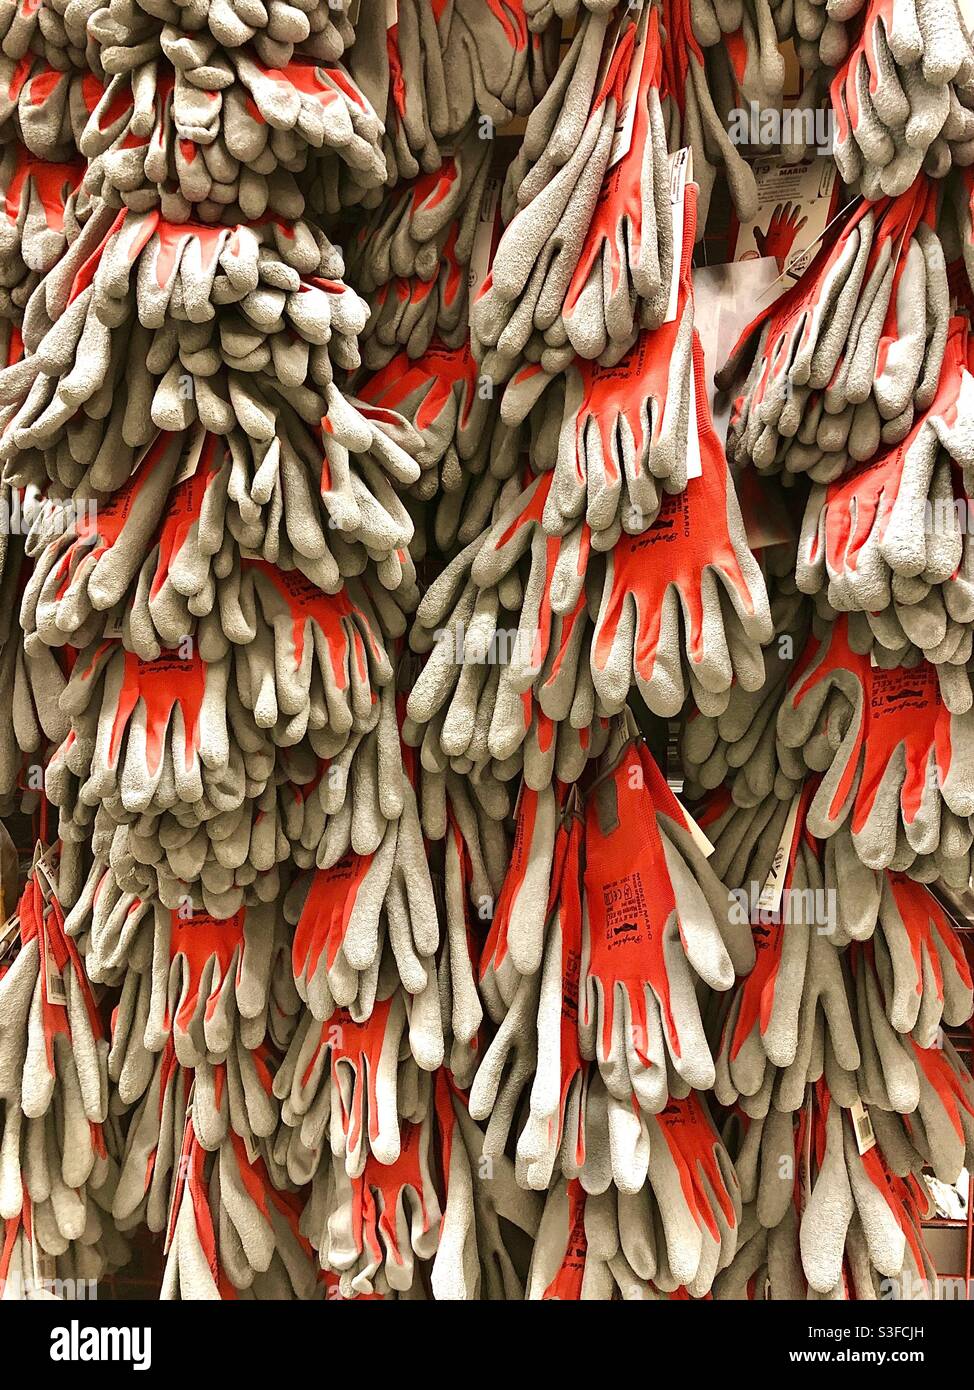 Rack of red and white rubber gloves for gardeners and builders. Stock Photo